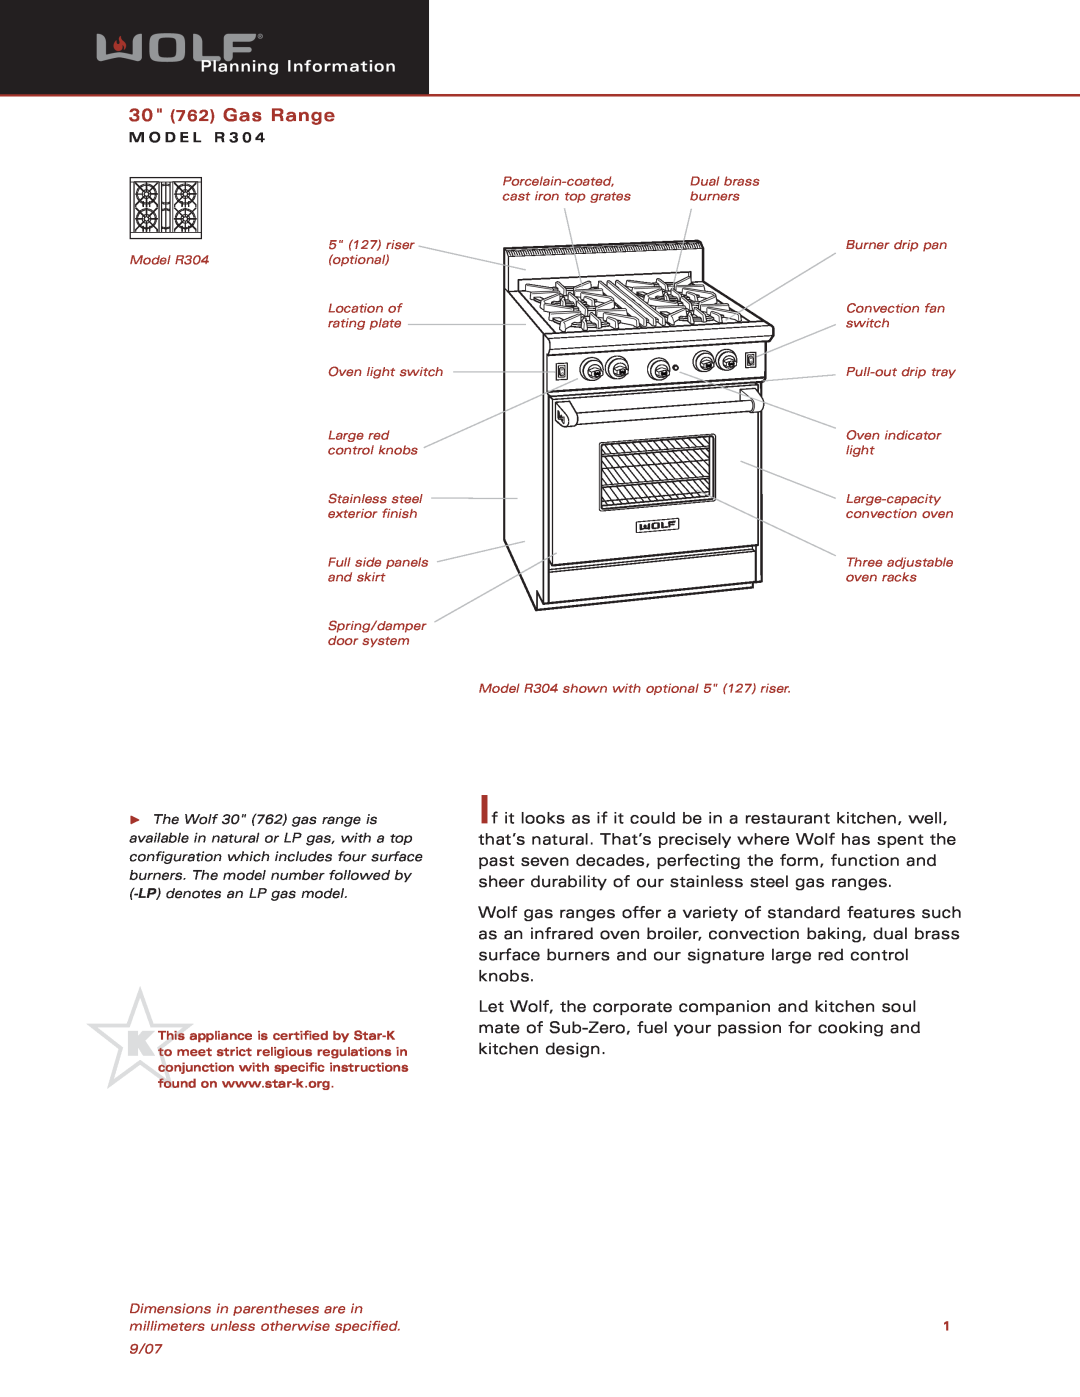 Wolf Appliance Company R304 dimensions 30 762 Gas Range, Planning Information 